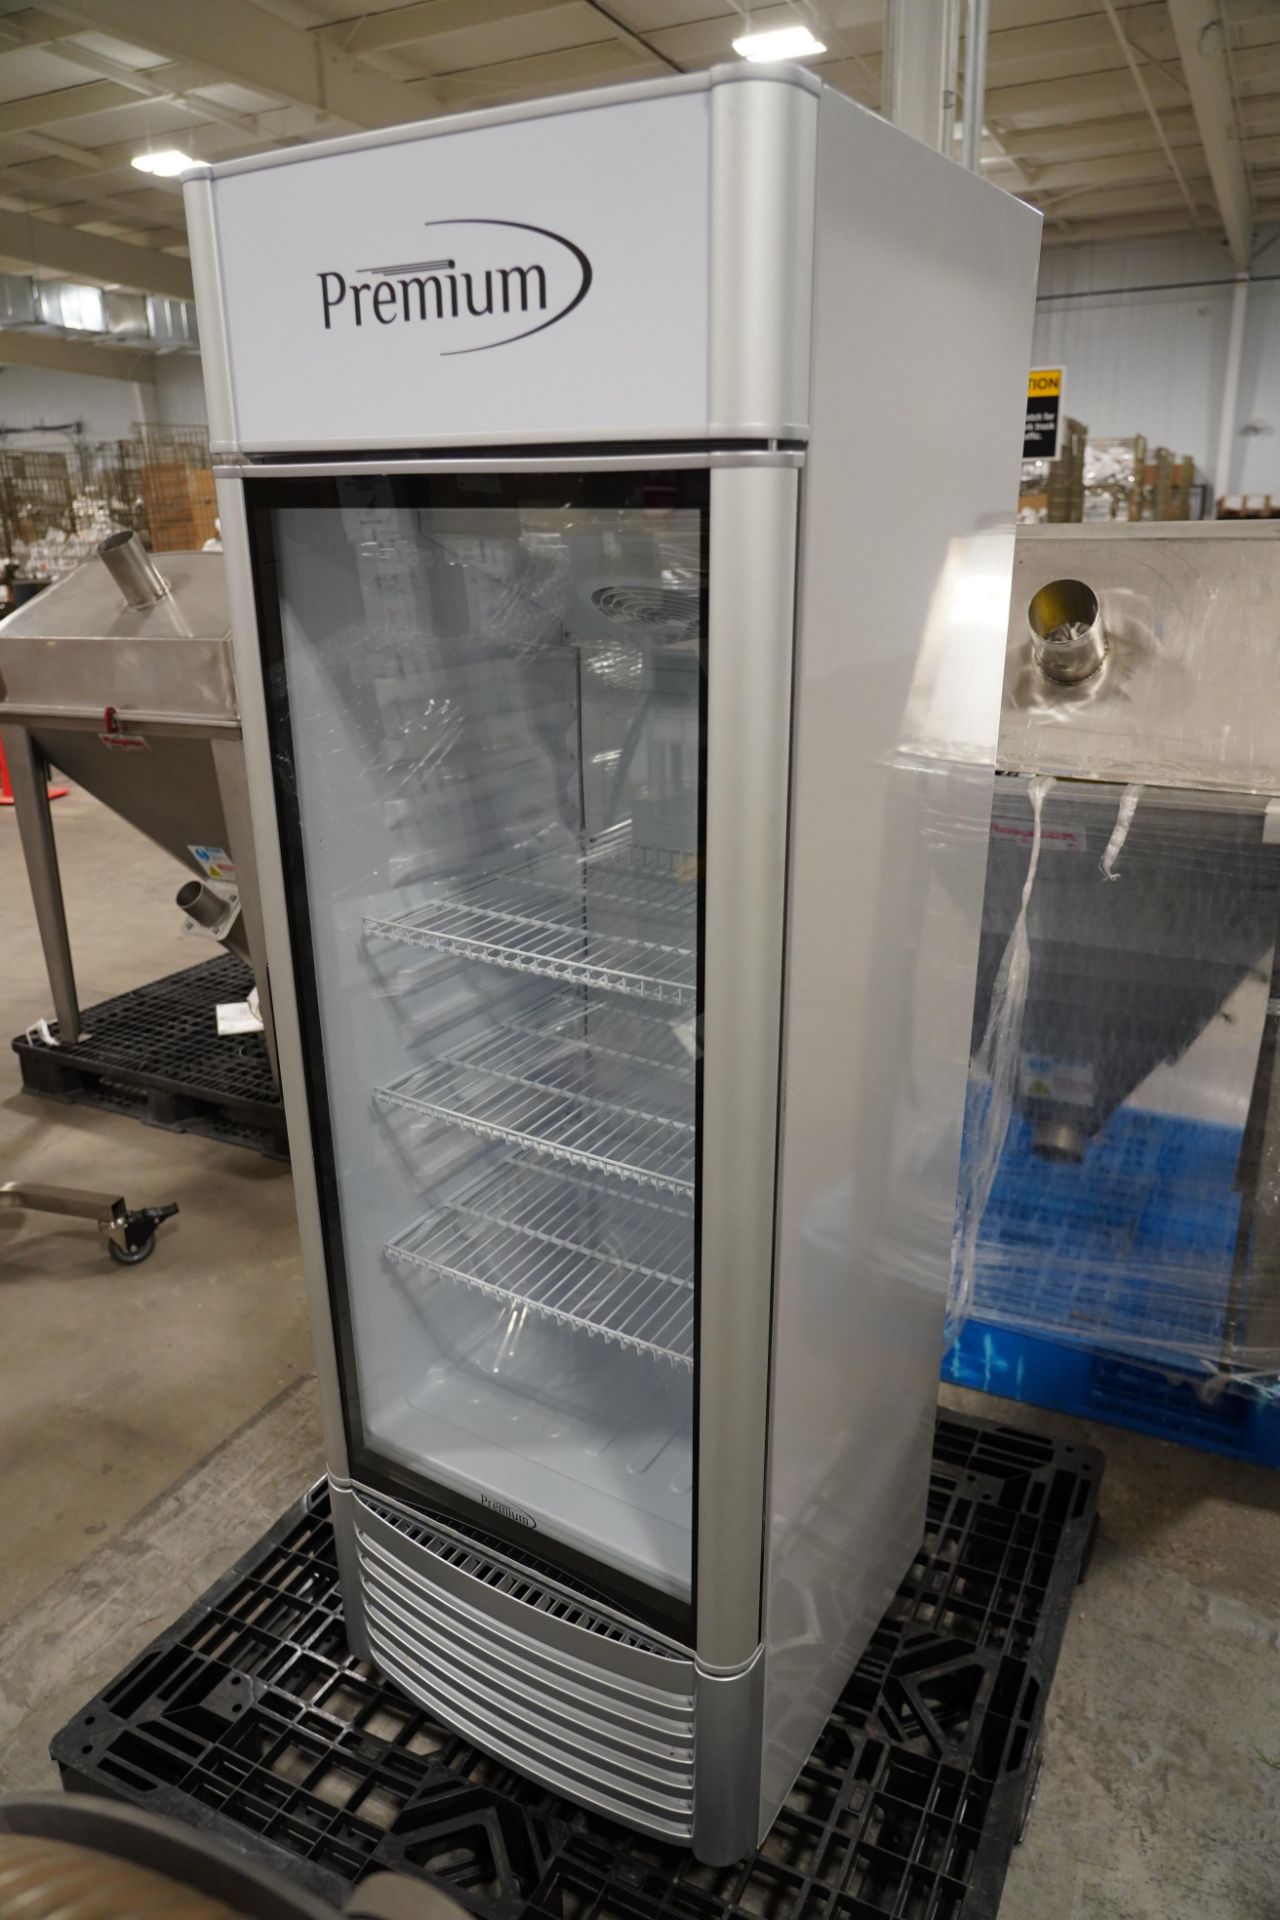 Premium Glass-Front Commercial Refrigerator - Image 2 of 4